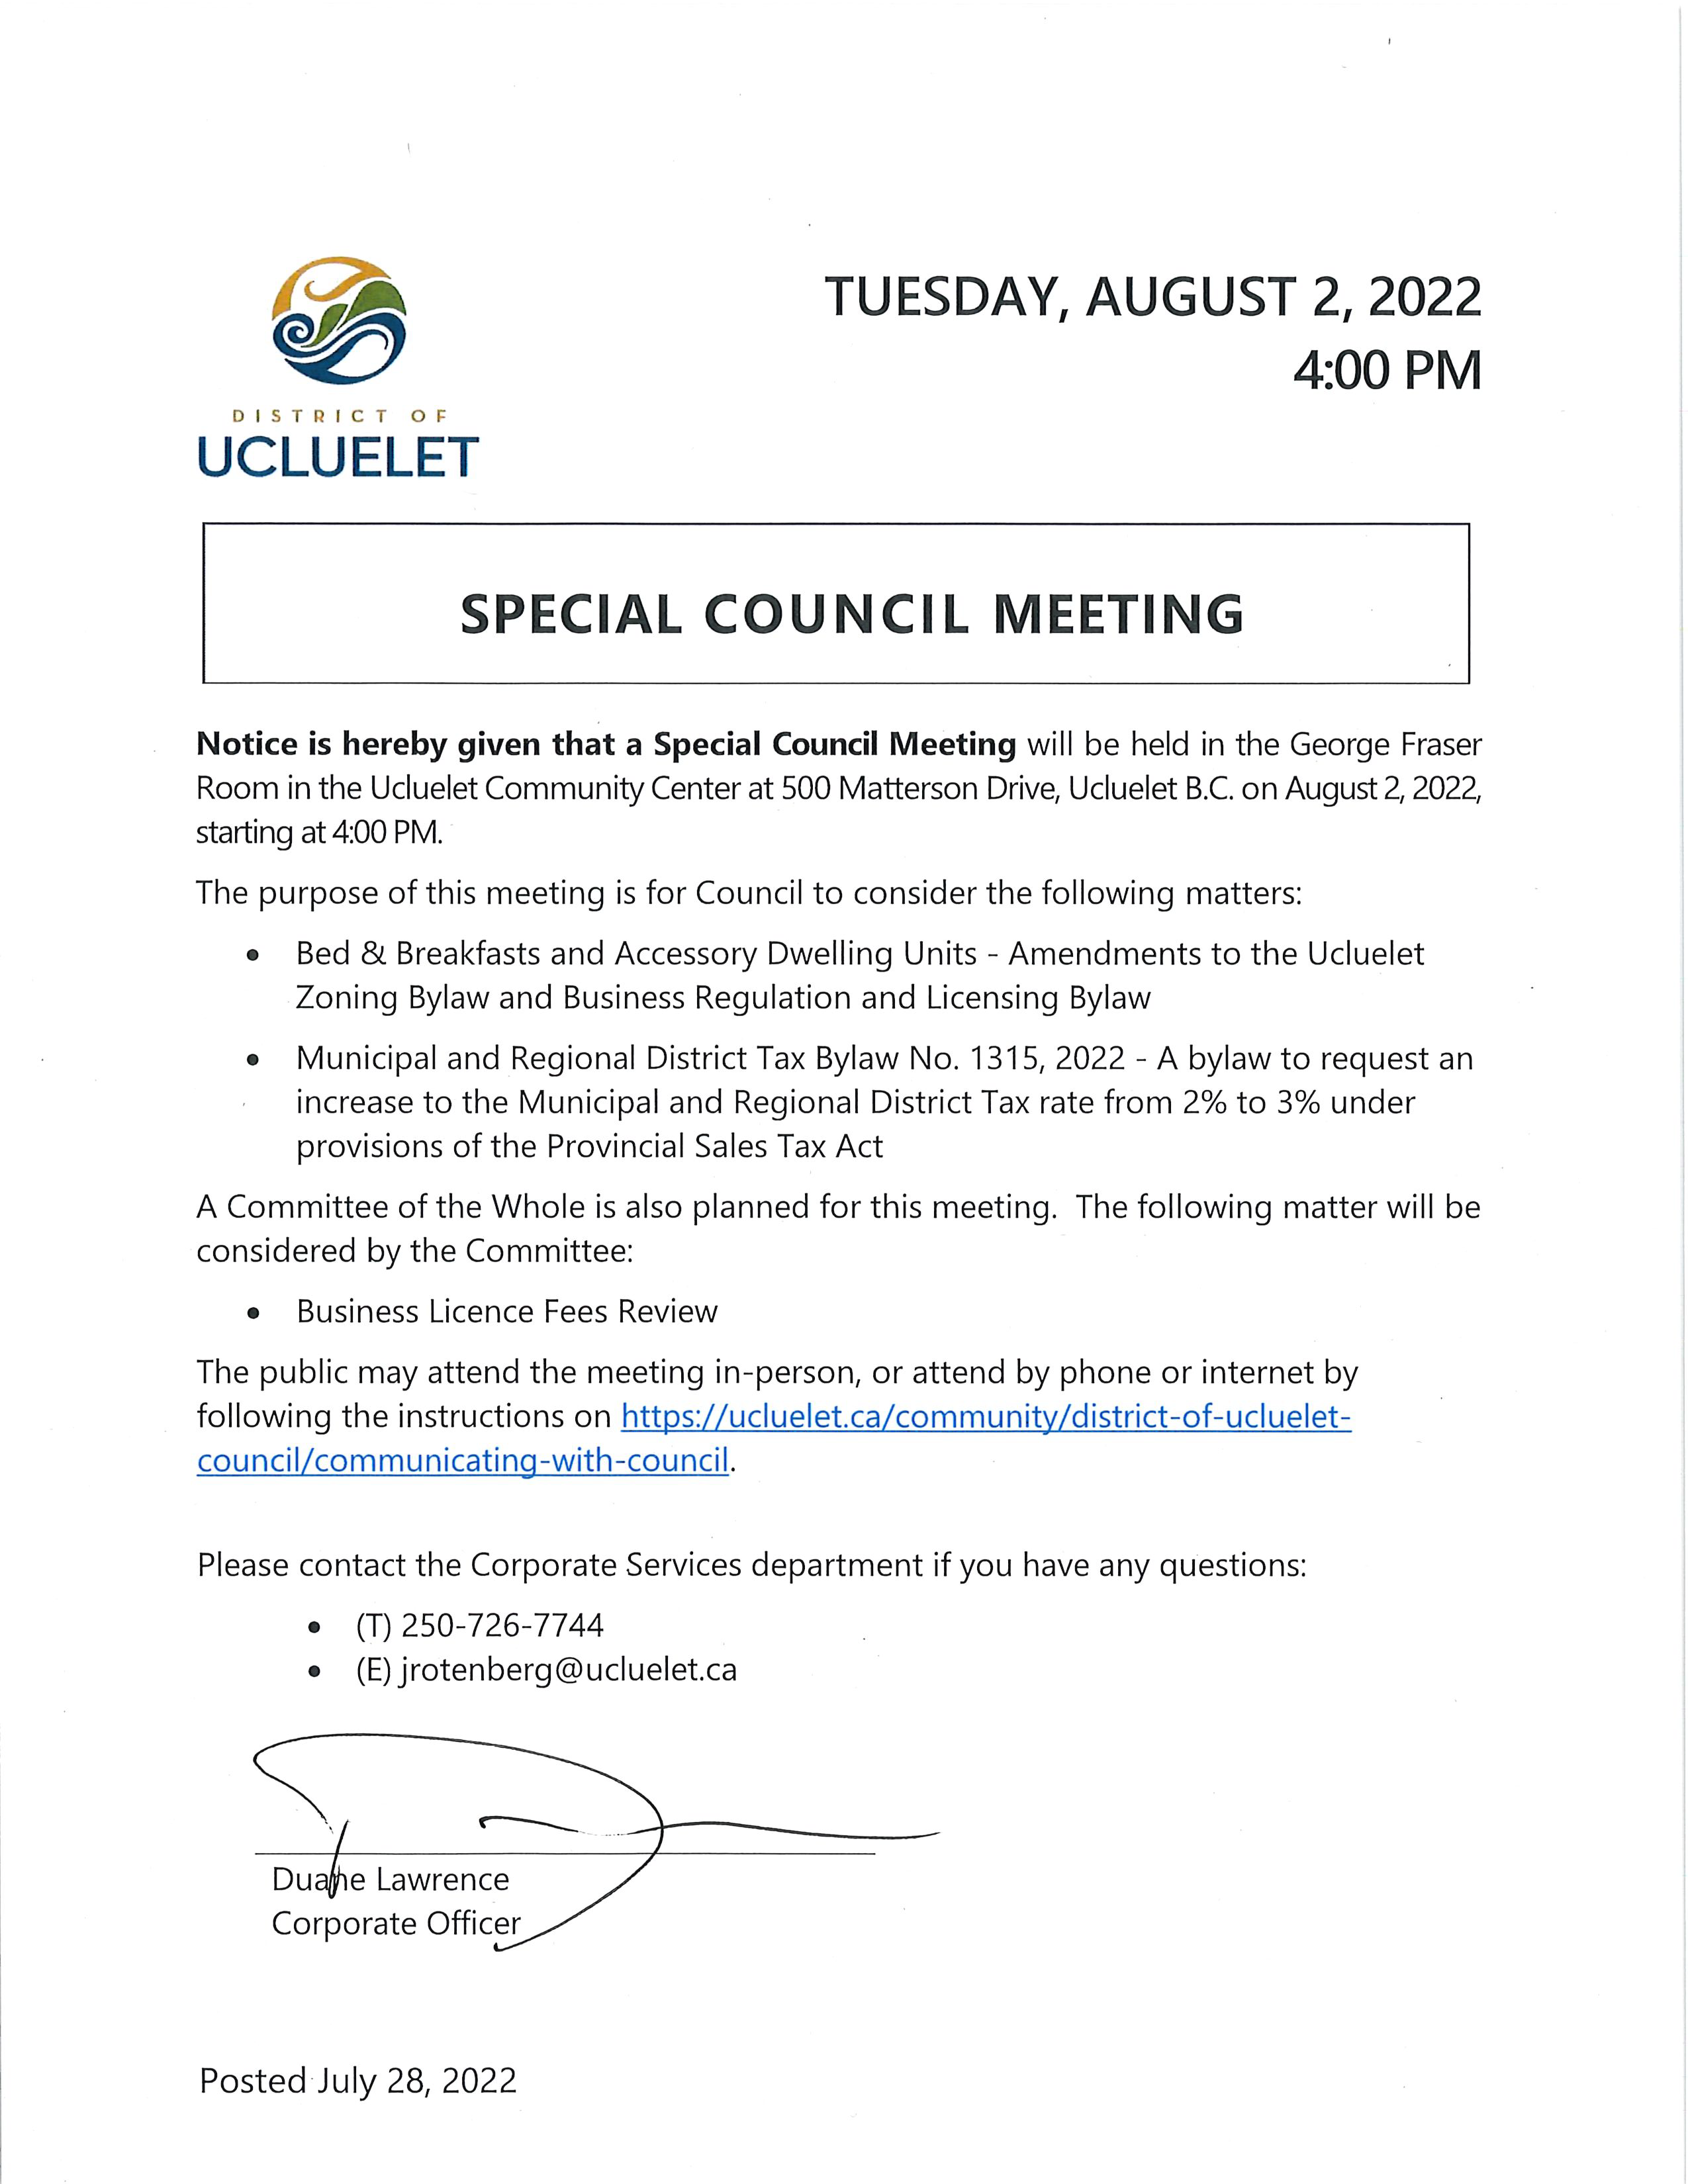 2022-08-02_Special_Meeting_Notice.png